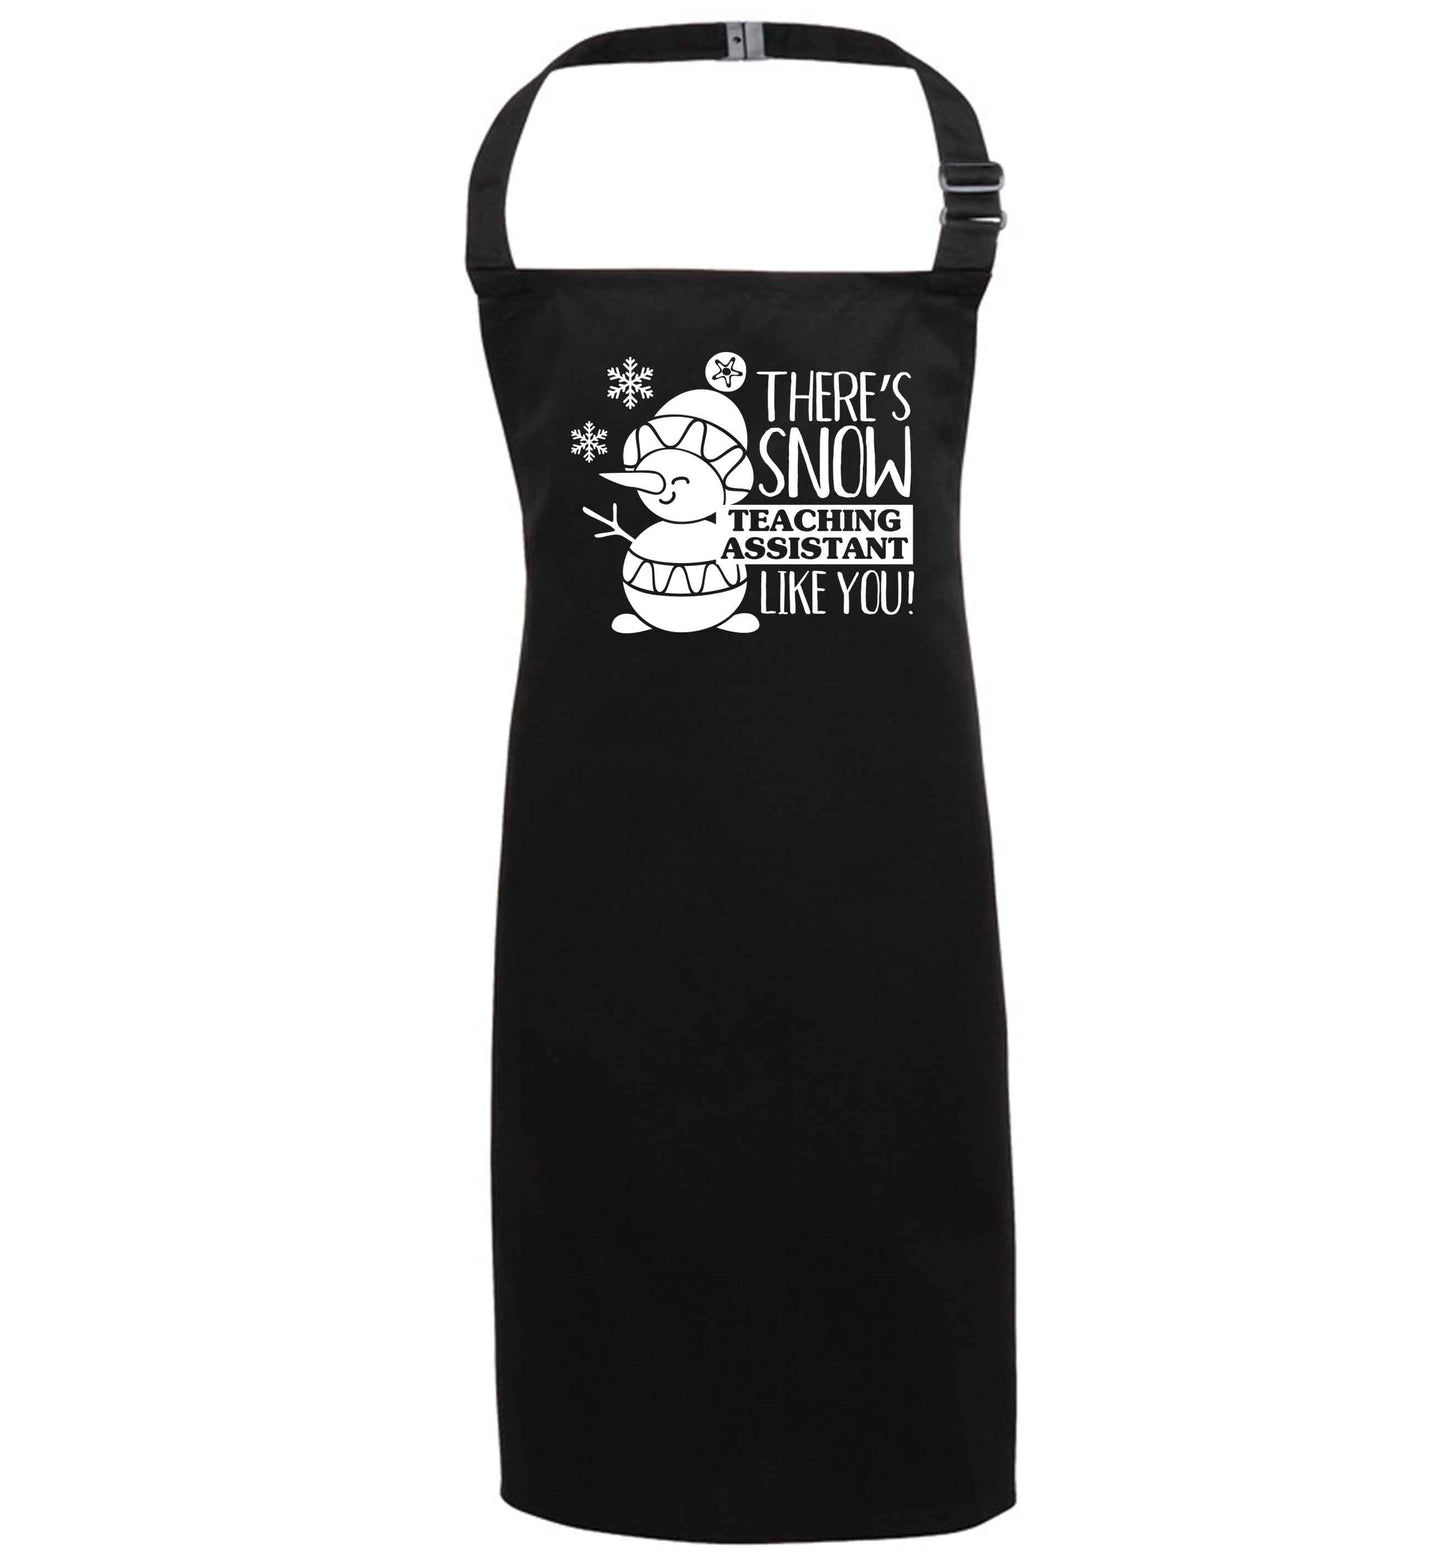 There's snow teaching assistant like you black apron 7-10 years